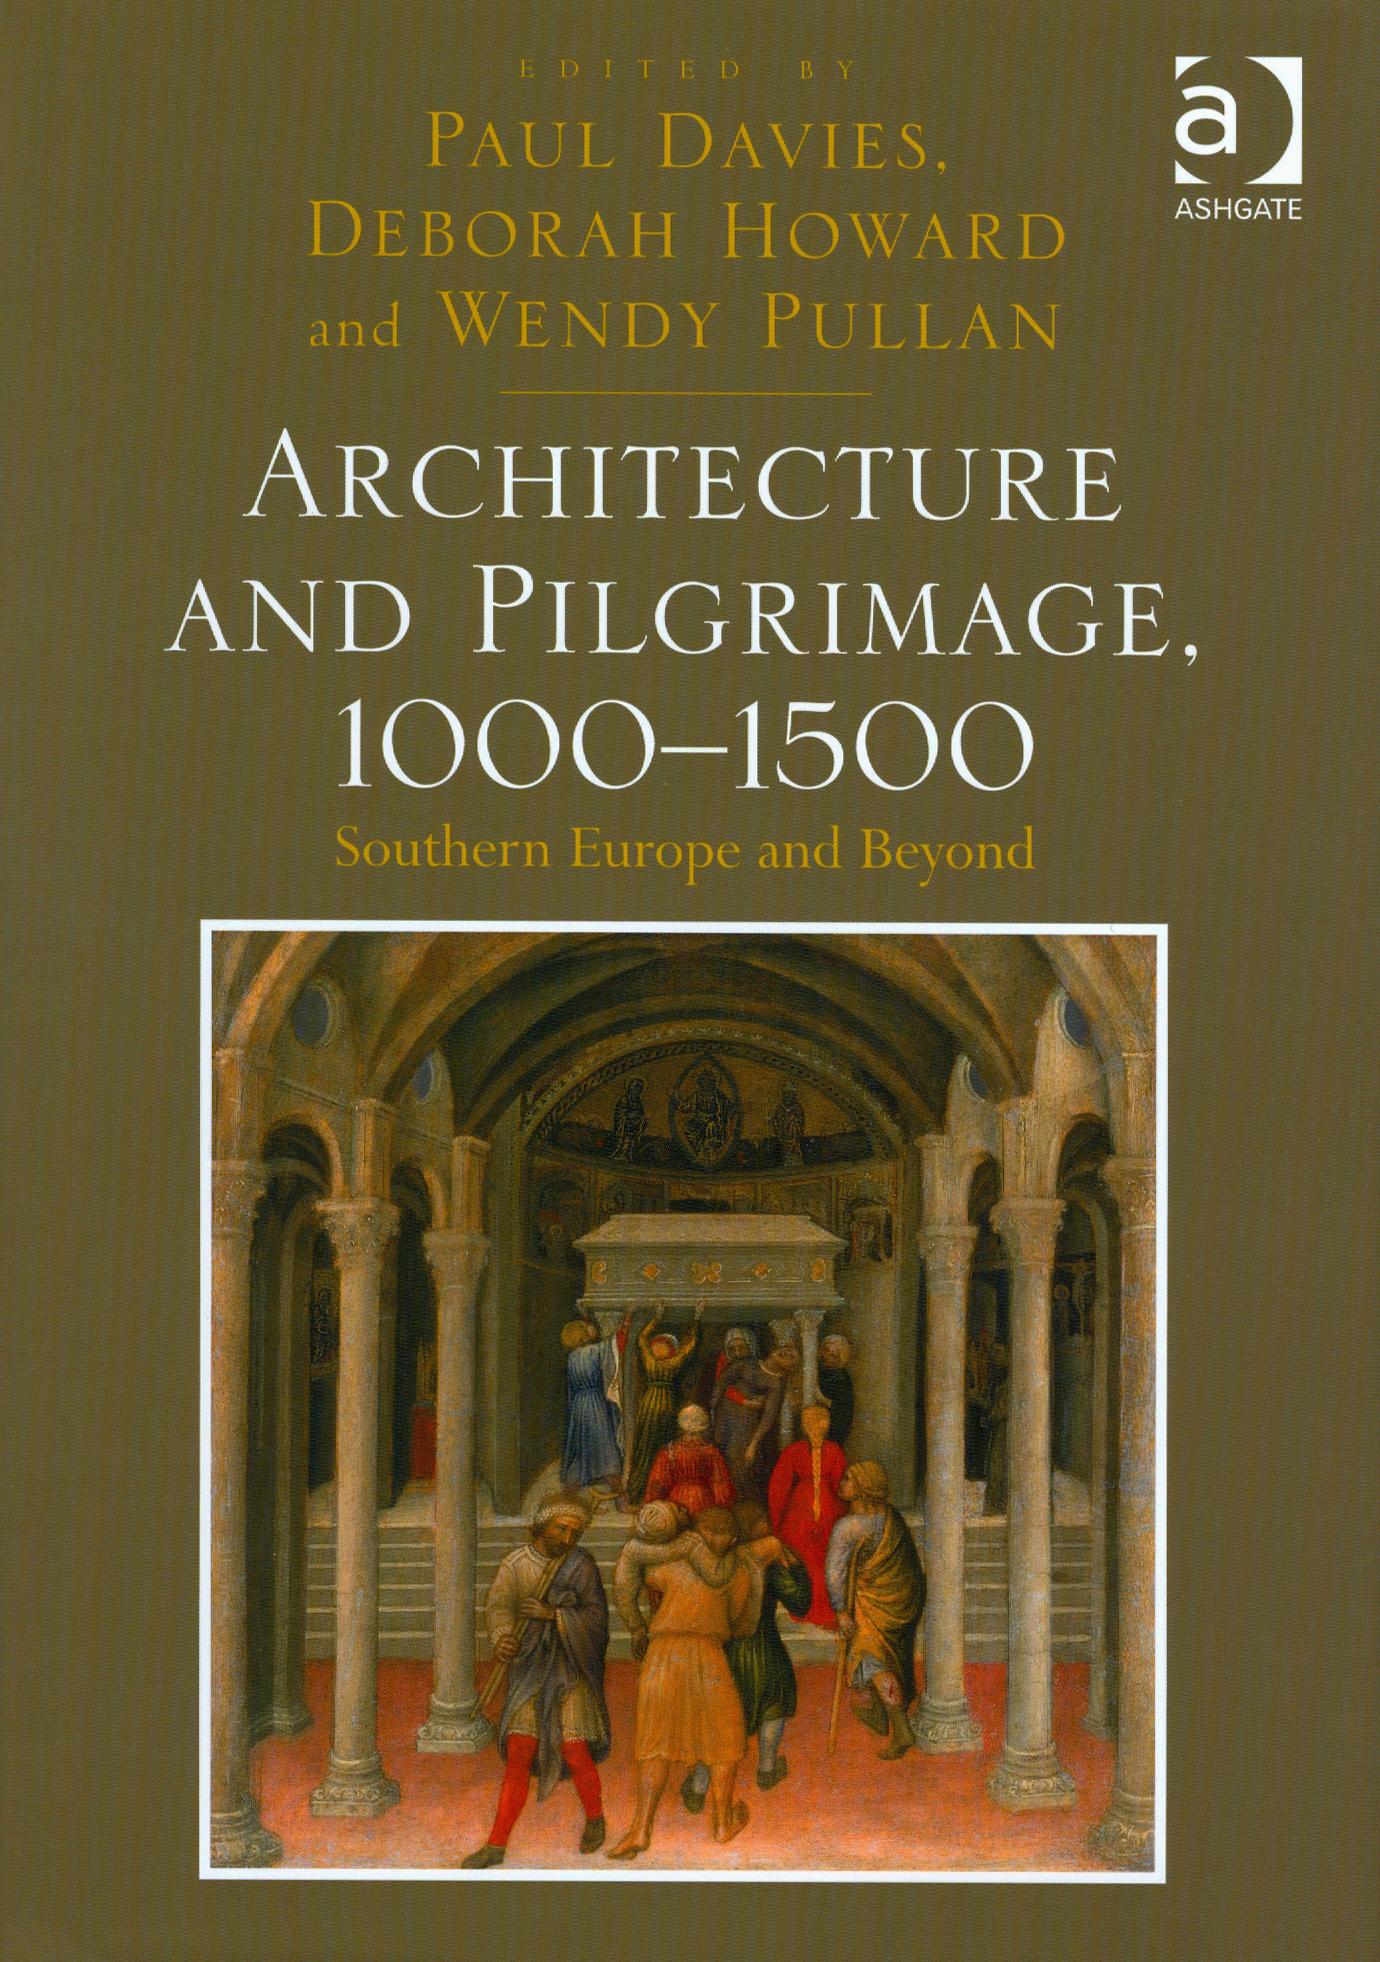 'Architecture and Pilgrimage 1000-1500: Southern Europe and Beyond': a new book edited by Deborah Howard, Wendy Pullan and Paul Davies